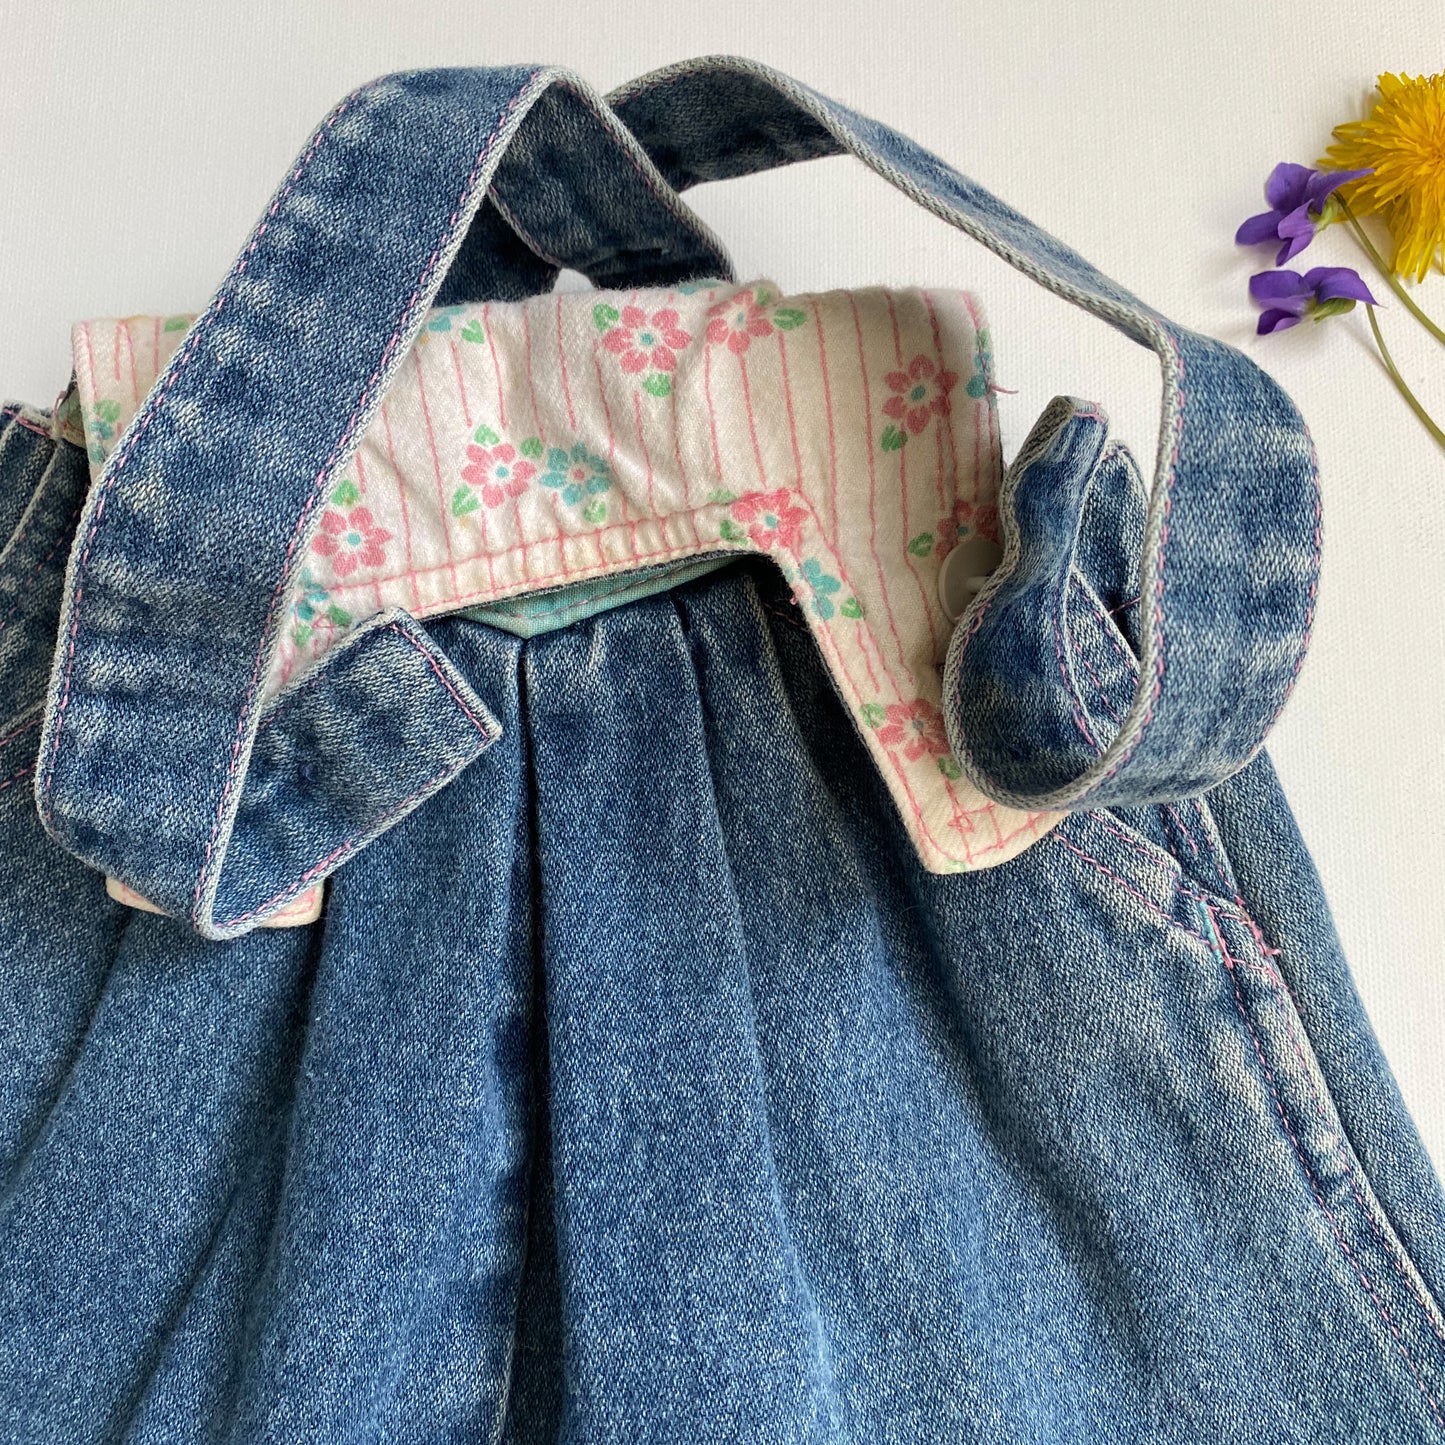 Vintage Denim Overall Dress with Embroidered Appliqué 18M